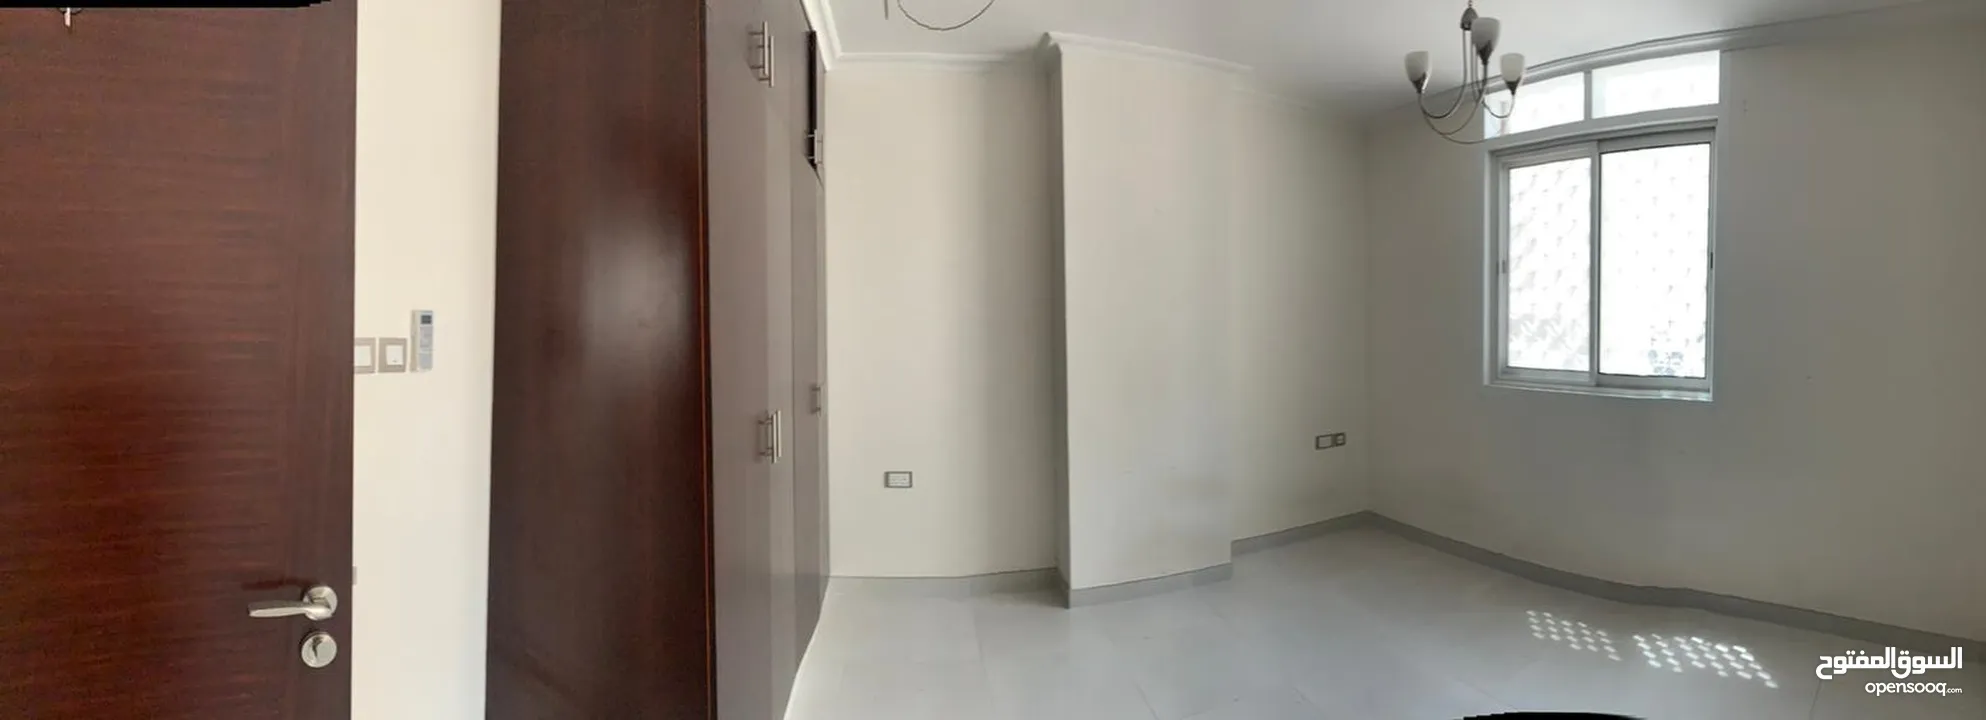 Apartment for Rent in Al Khuwair- 1BHK